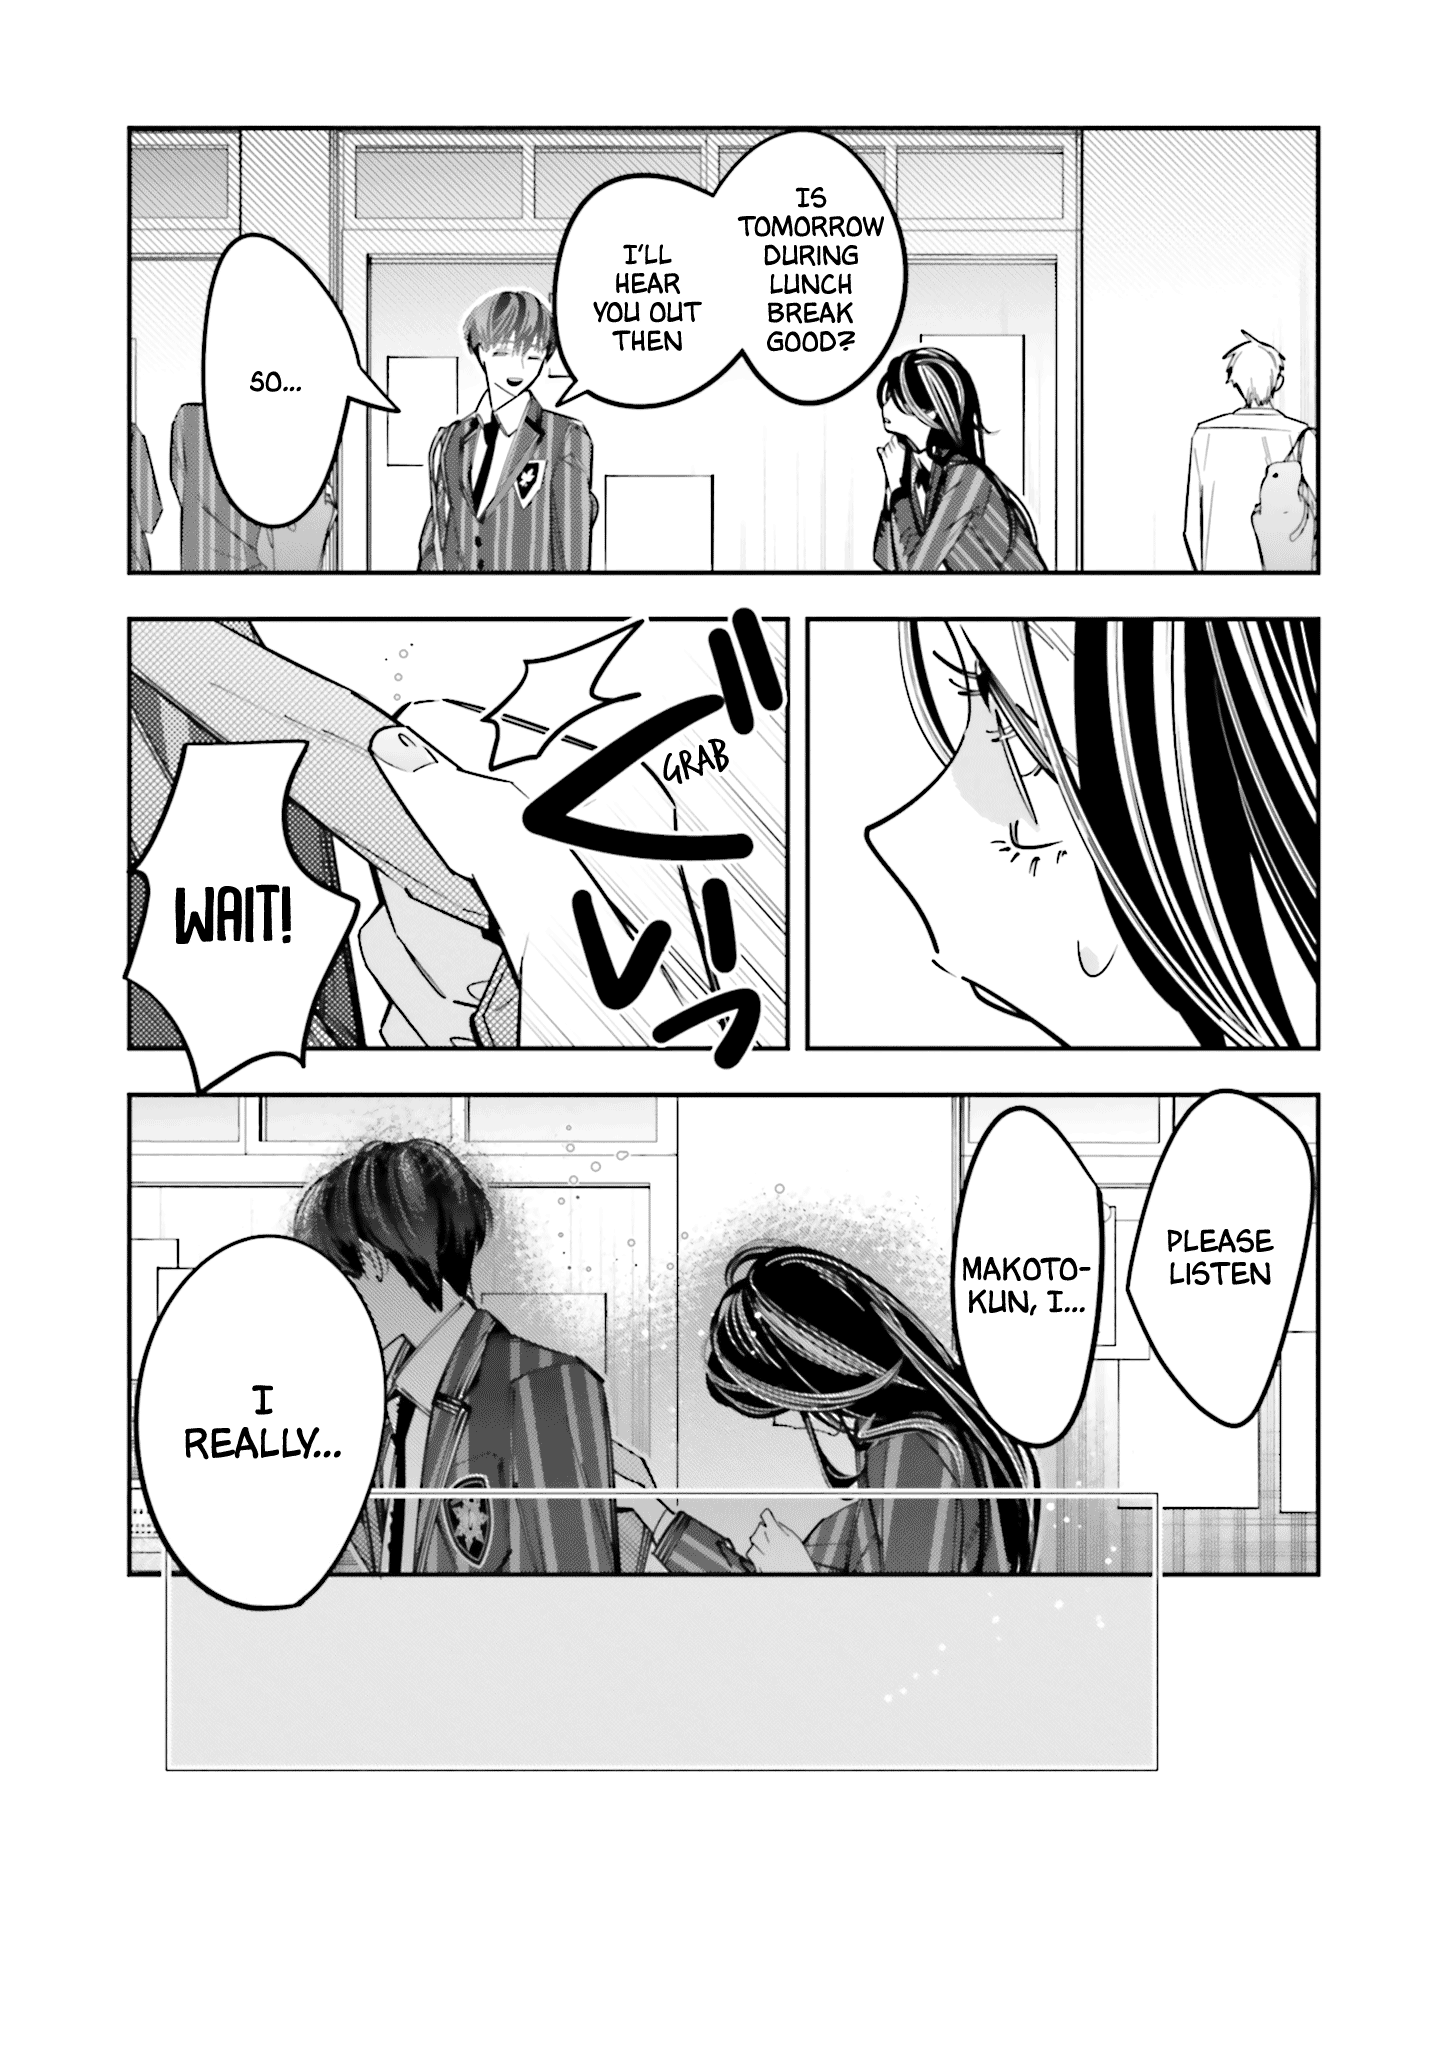 I Reincarnated As The Little Sister Of A Death Game Manga's Murder Mastermind And Failed Chapter 10 #19